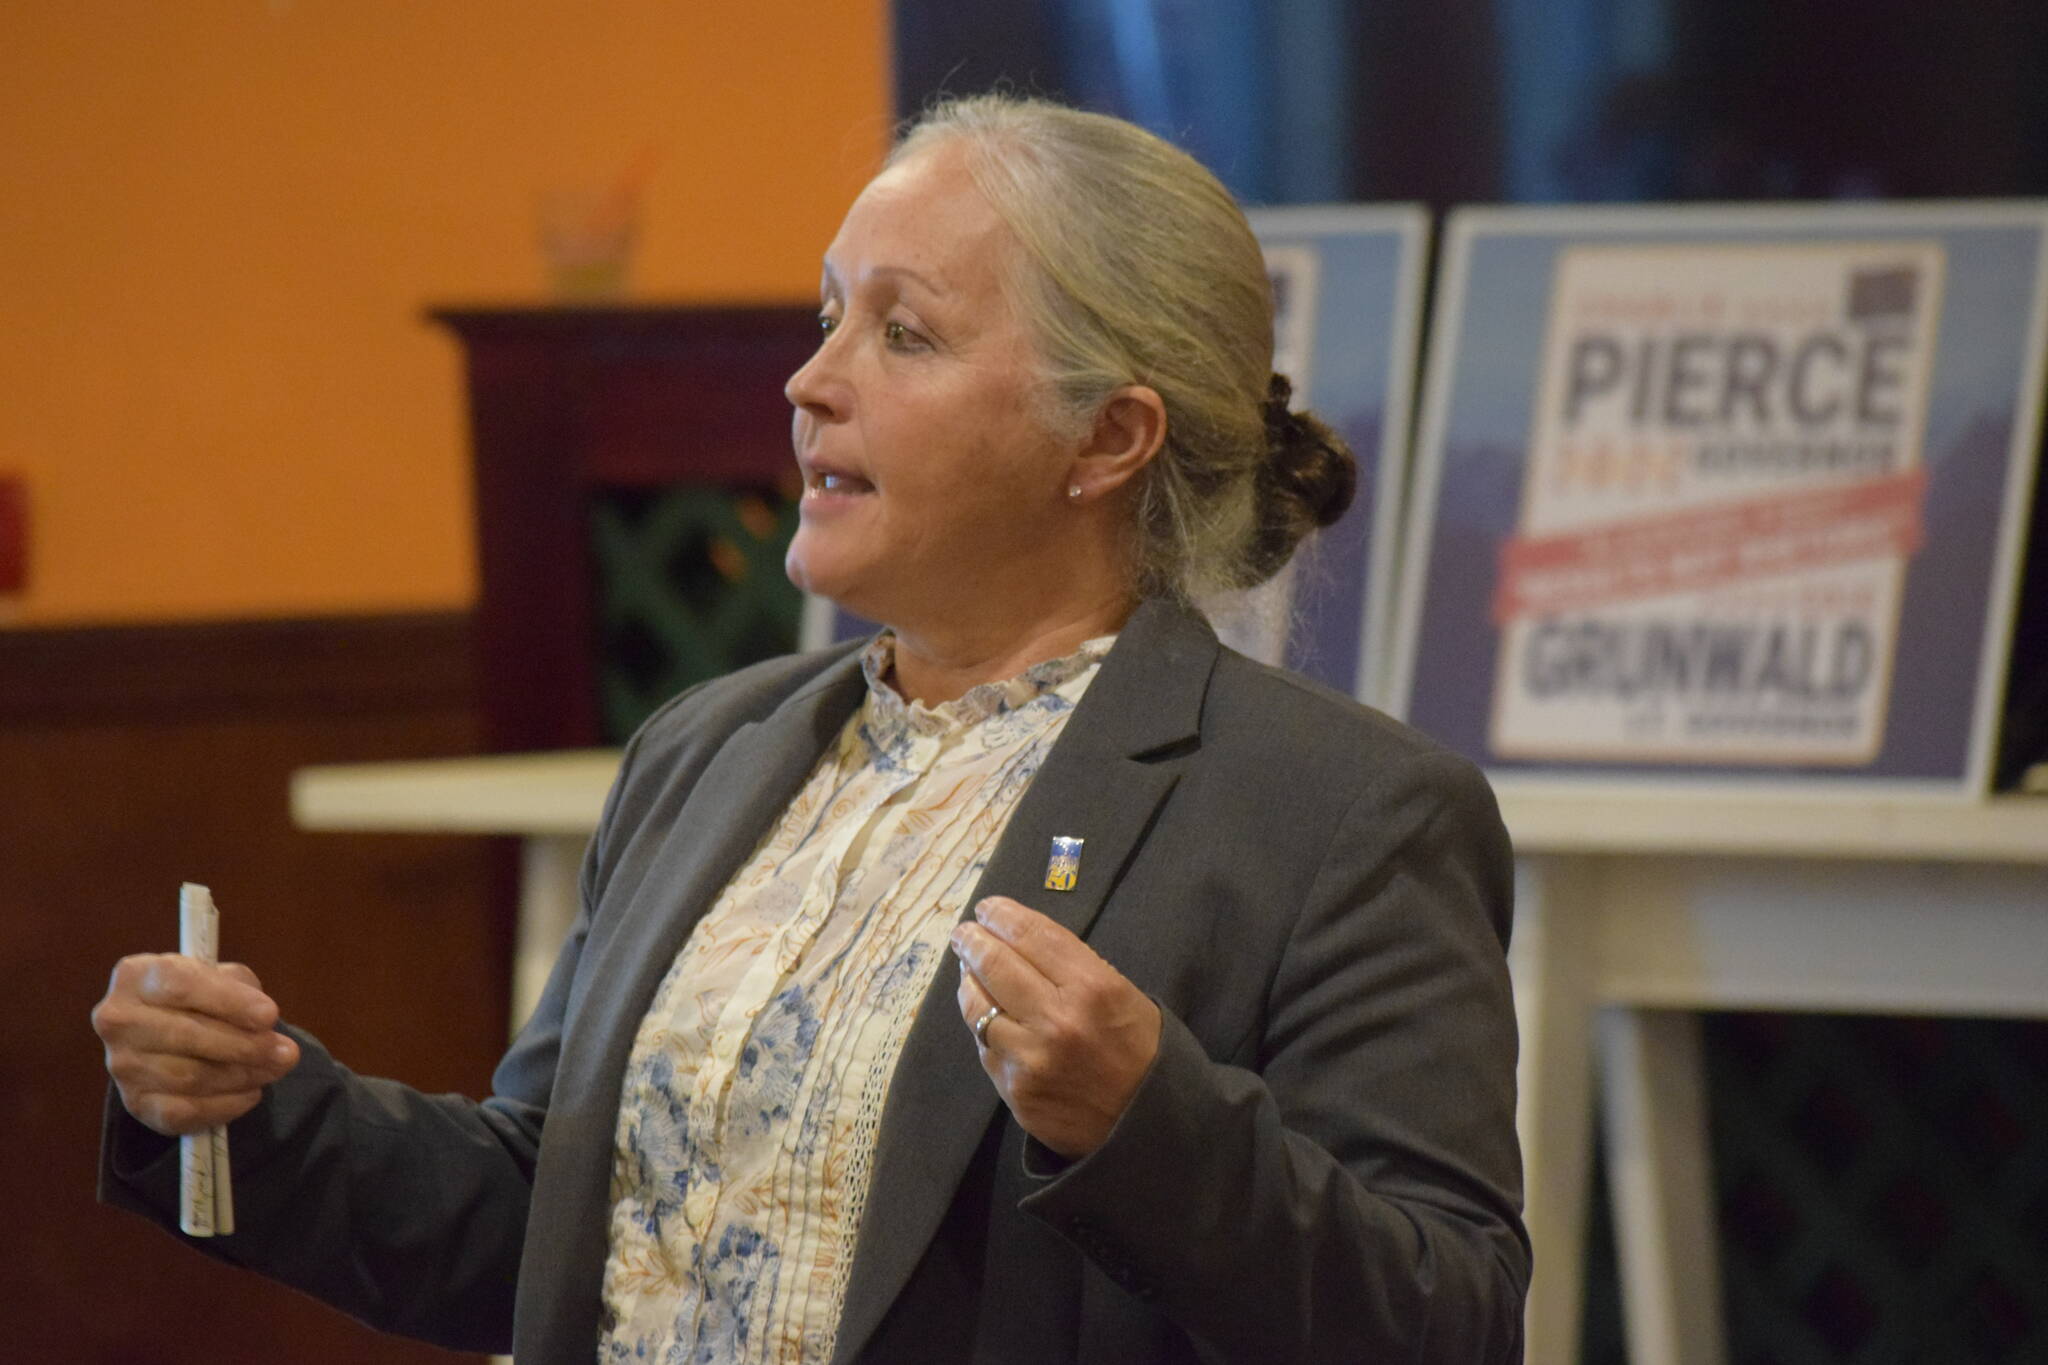 Lieutenant Governor candidate Edie Grunwald speaks at a Charlie Pierce campaign event at Paradisos restaurant in Kenai on Saturday, March 5, 2022. (Camille Botello/Peninsula Clarion)